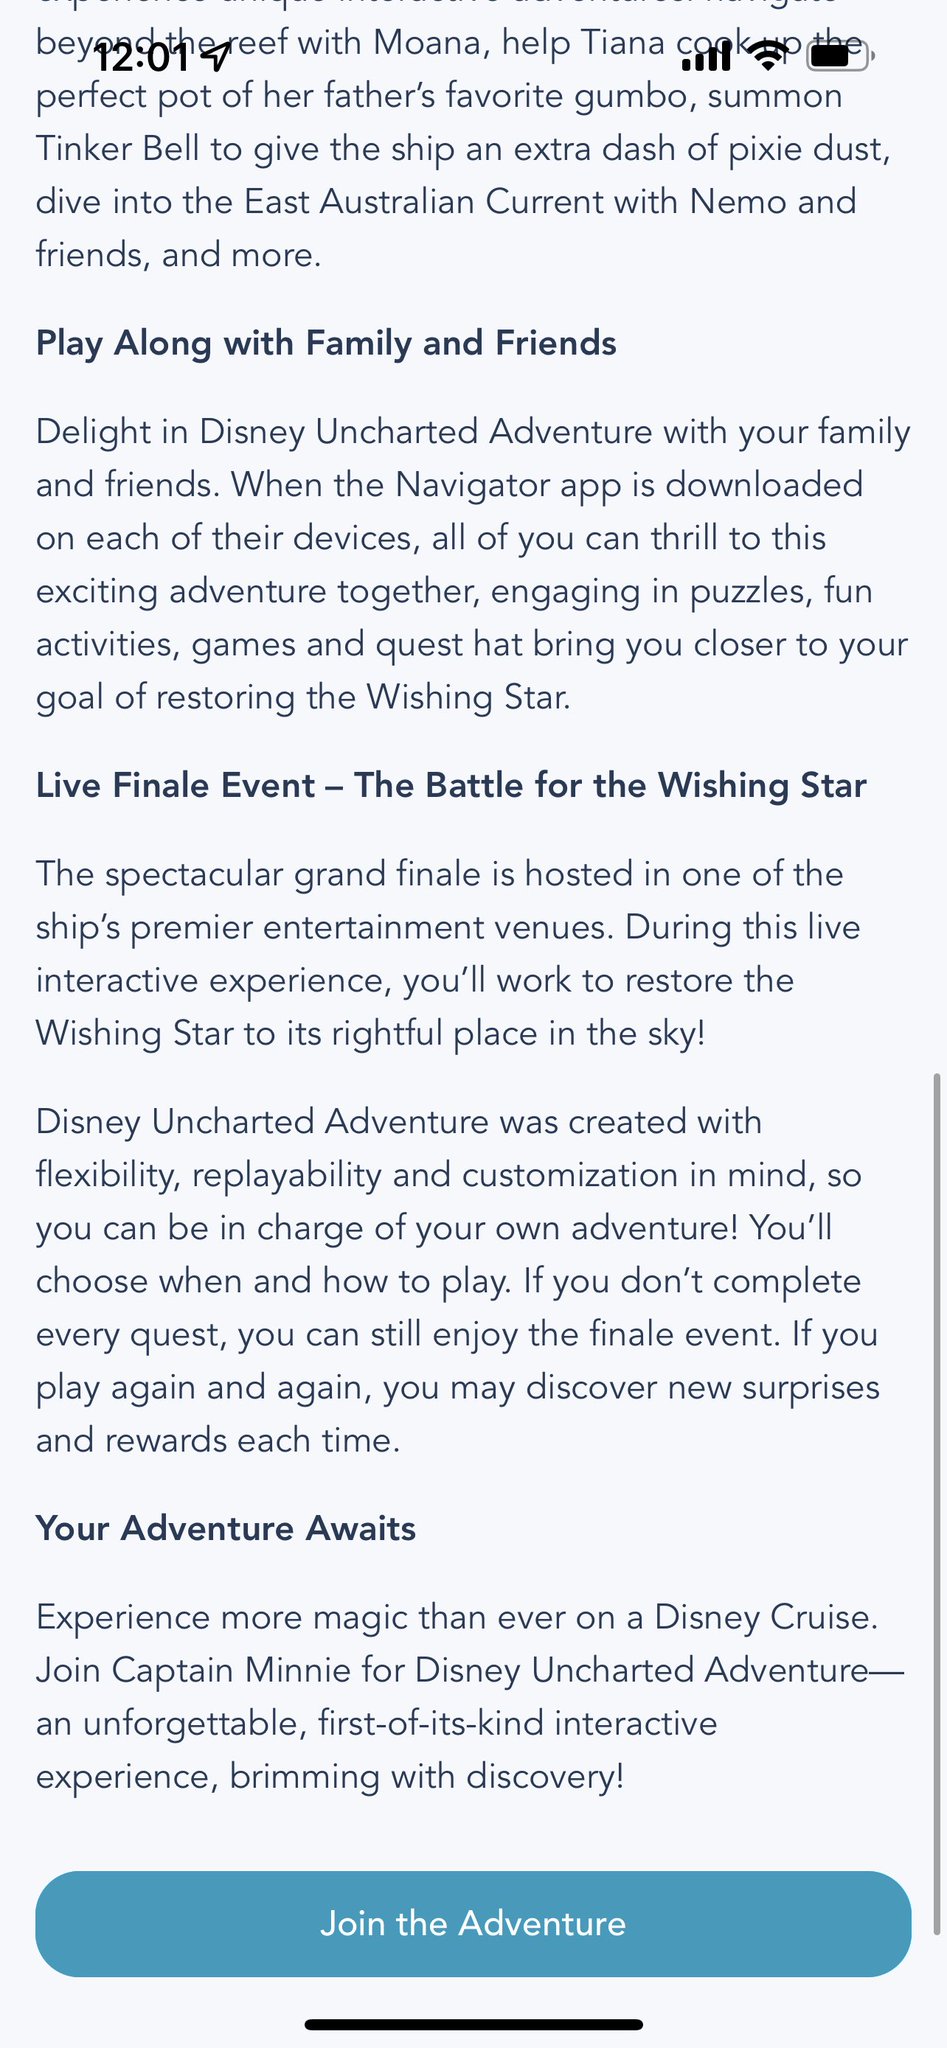 DCL Navigator App Disney Uncharted Adventure Learn More 2